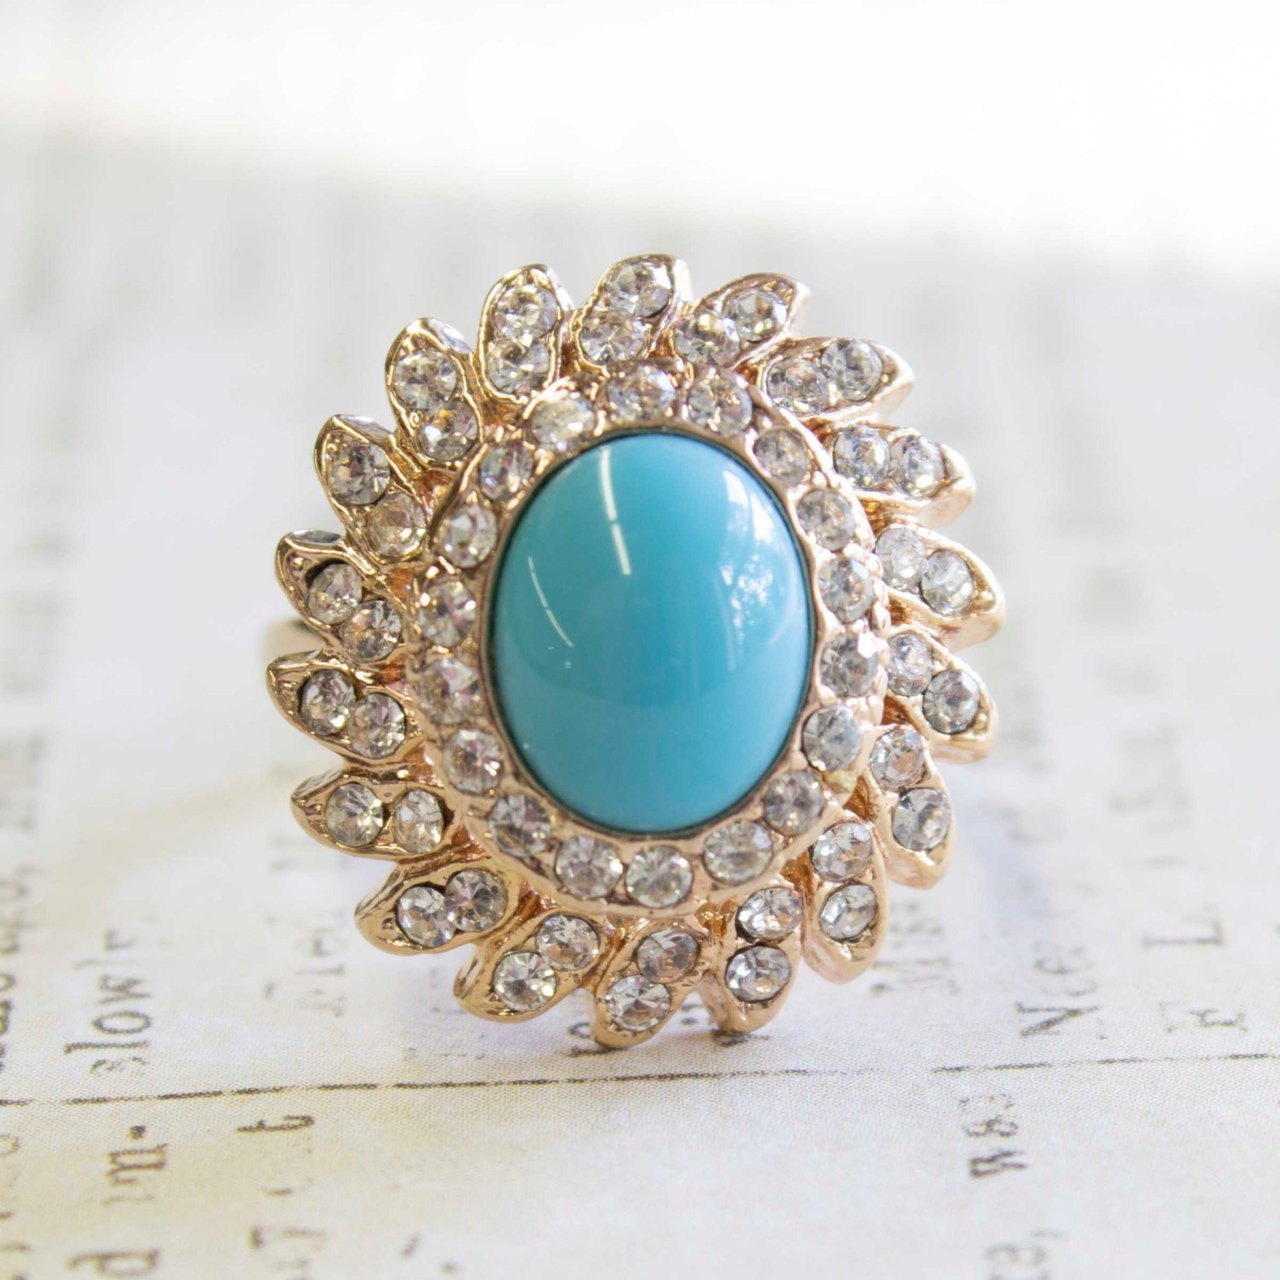 Vintage Jewelry Pinfire Opal Cocktail Ring in a 18k Gold Electroplated Setting Made in the USA by PVD Vintage Jewelry